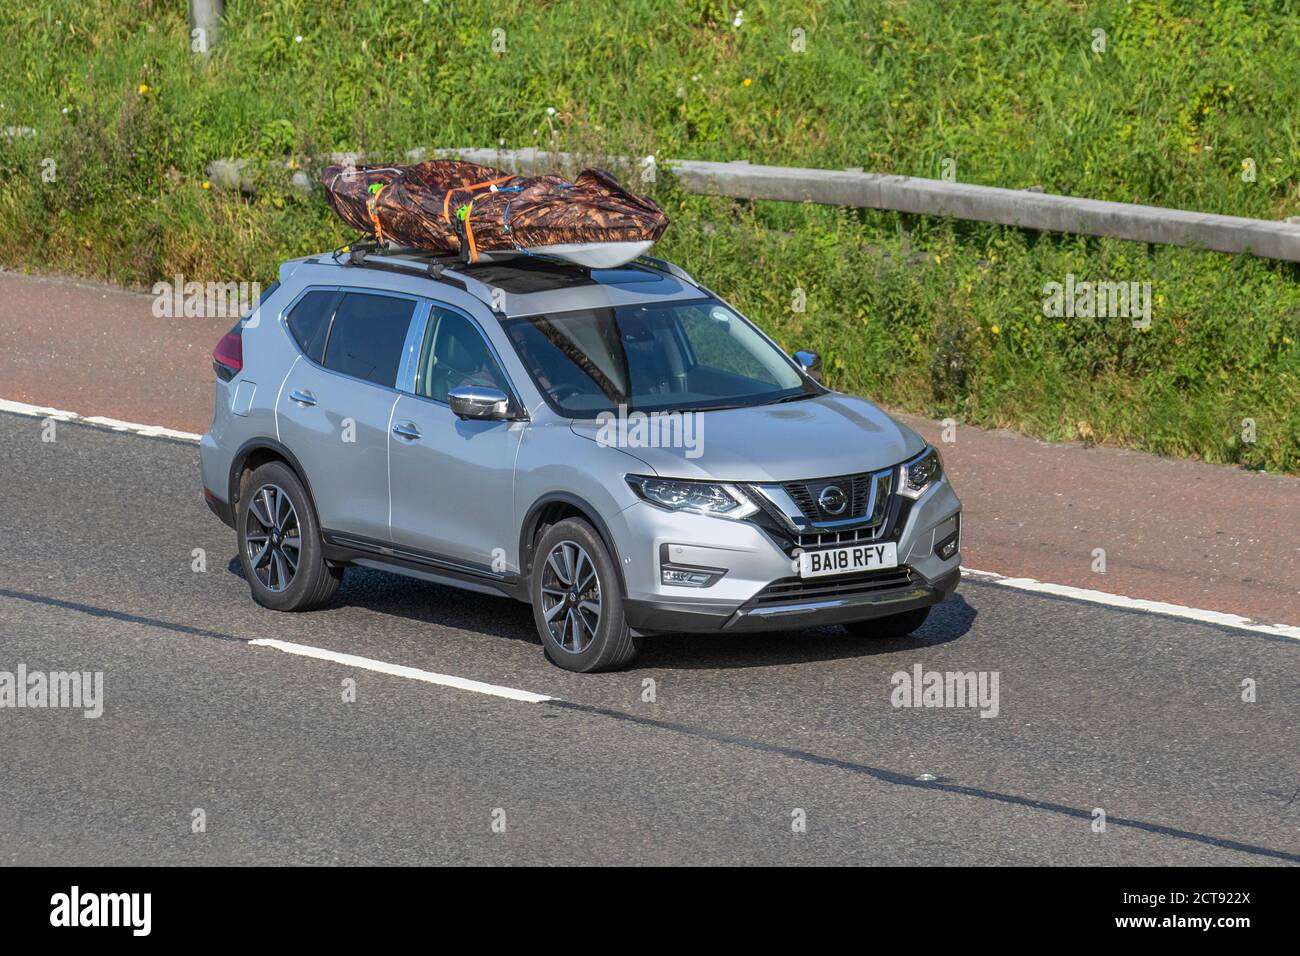 2018 Nissan X-Trail Tekna DCI 4X4 CVT with covered canoe or kayak on roof rack; Vehicular traffic moving vehicles, cars driving vehicle on UK roads, motors, motoring on the M6 motorway highway network. Stock Photo